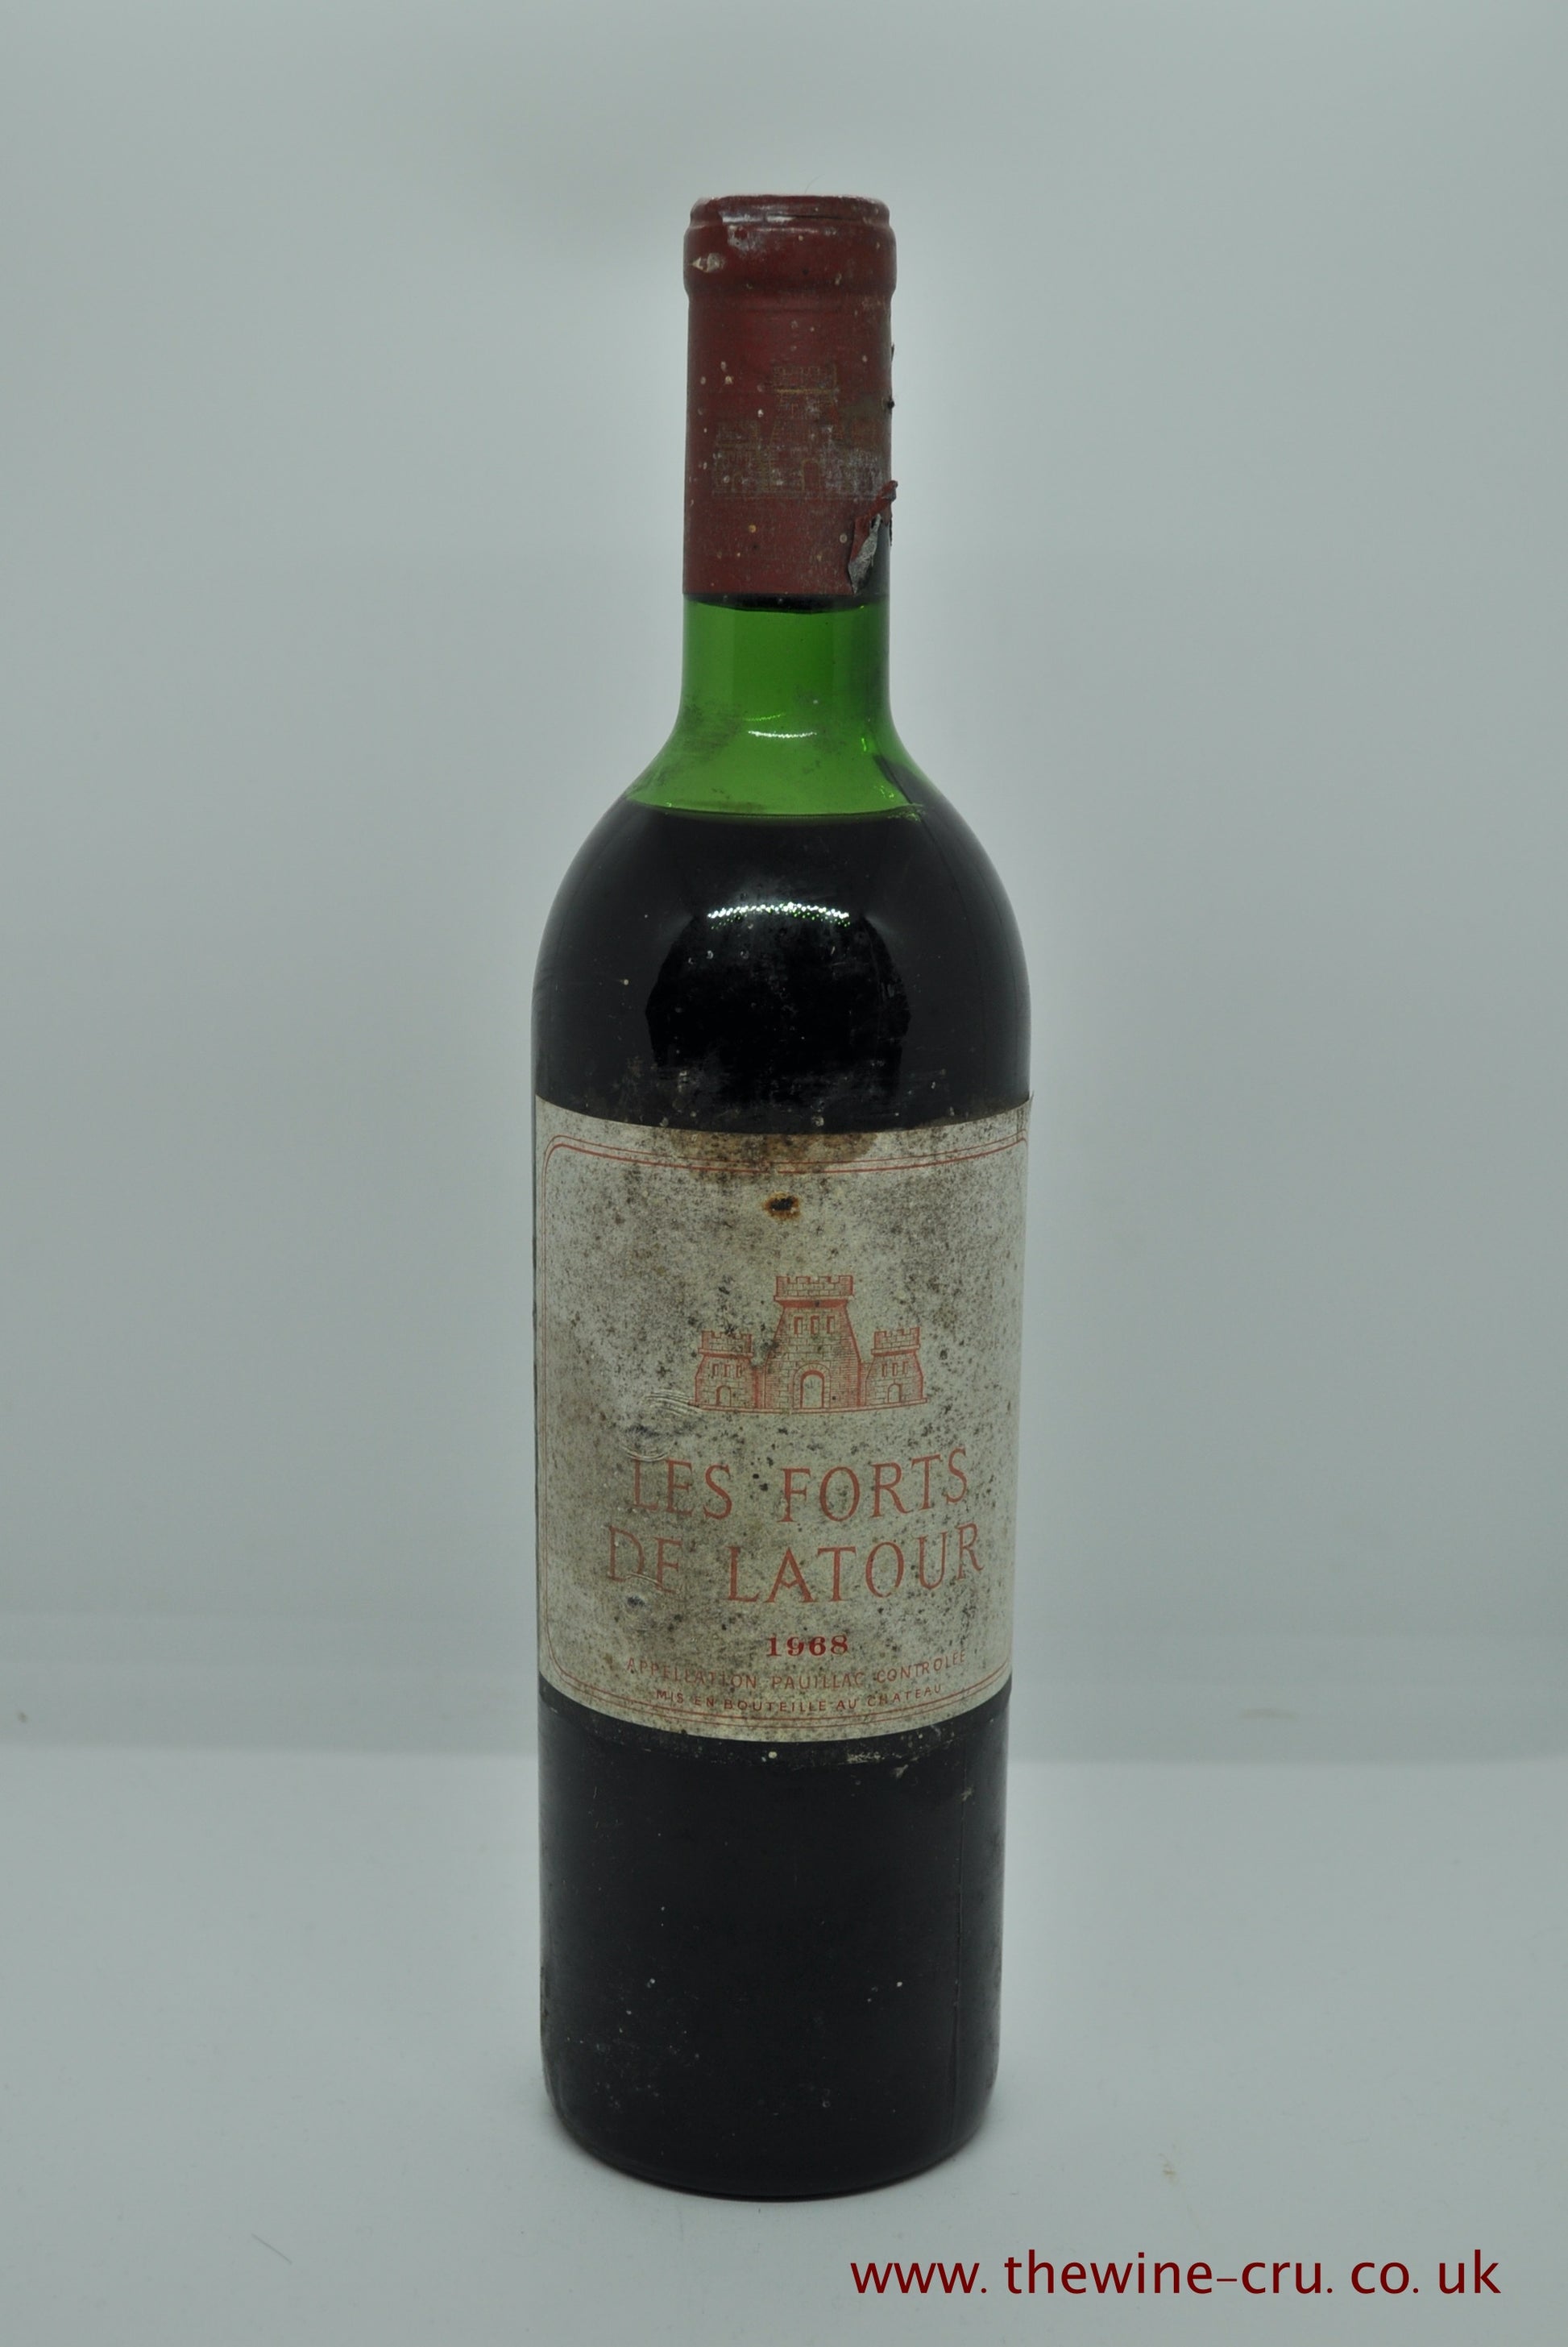 A bottle of 1968 vintage red wine. Les Forts de Latour the 2nd wine of Chateau Latour, France, Bordeaux. The label is bin soiled and the level top shoulder. Immediate delivery. Free local delivery. Gift wrapping available.